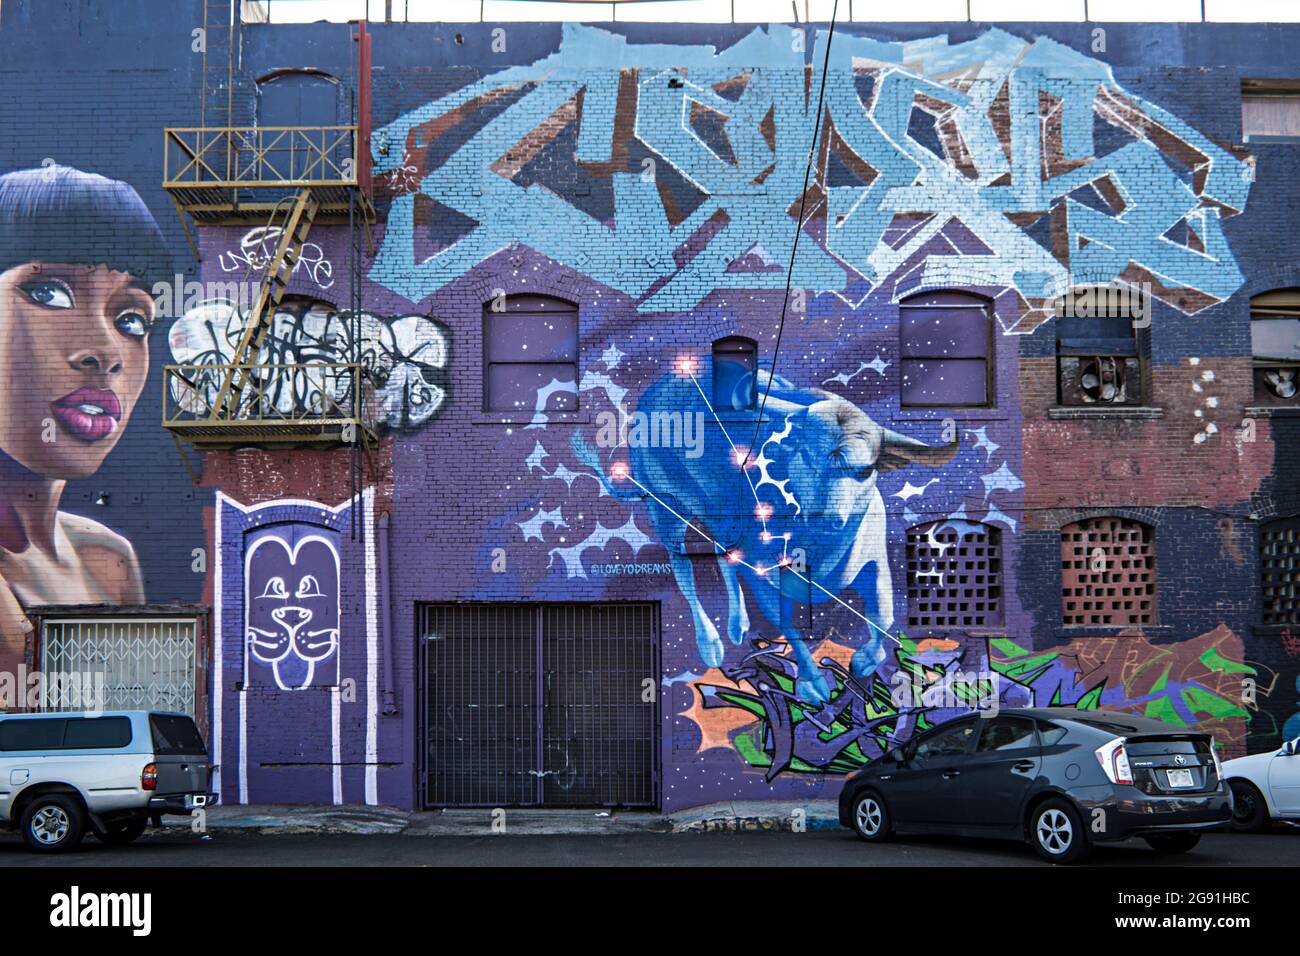 Murals And Street Art From The Arts District In Los Angeles California Stock Photo Alamy